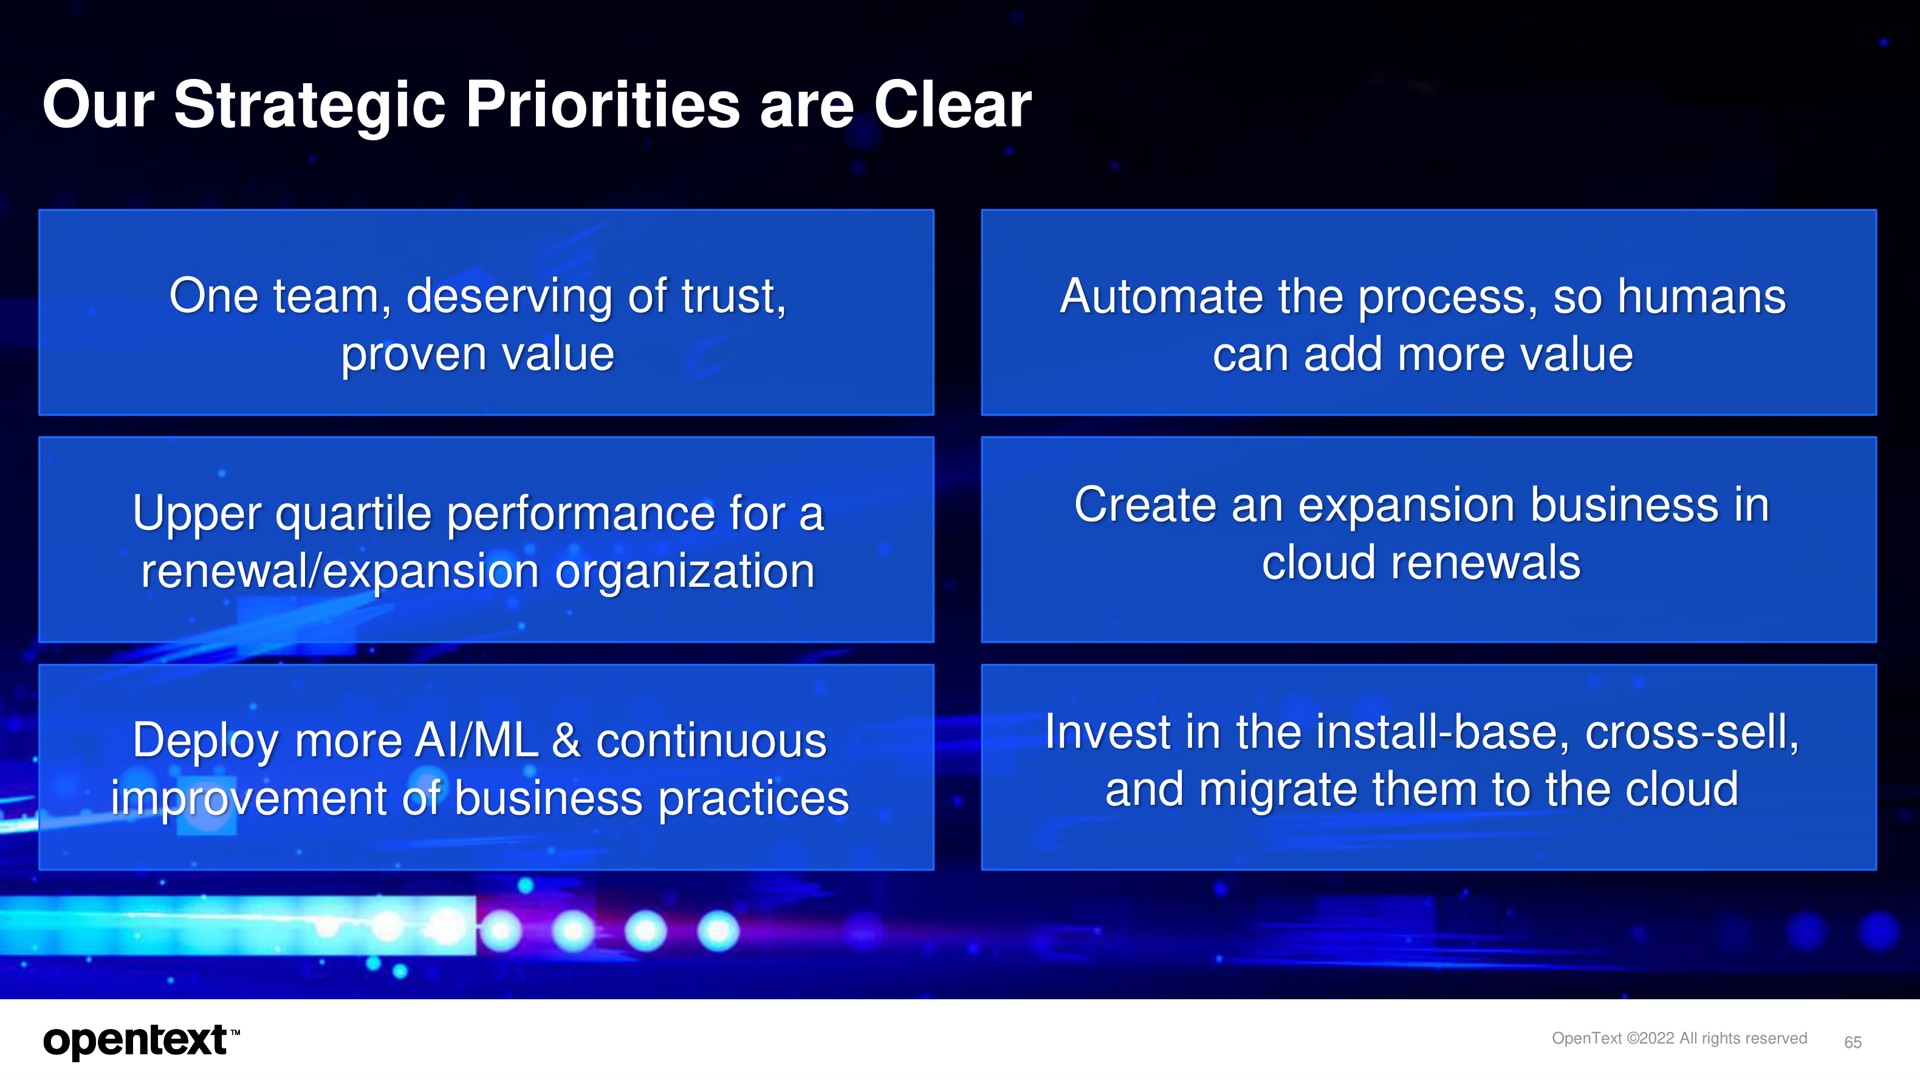 our strategic priorities are clear renewal expansion organization tau eus improvement of business practices and migrate them to the cloud | OpenText